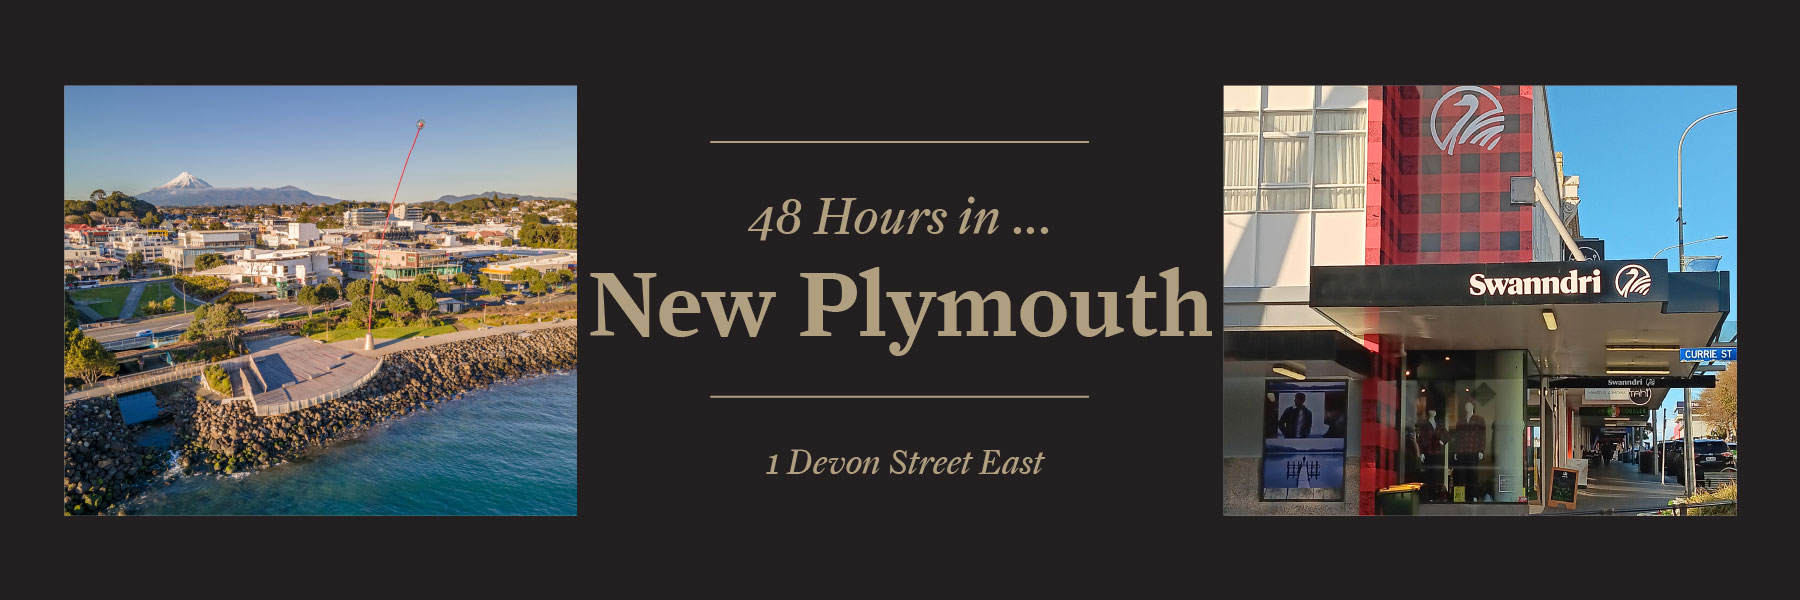 48 hours in New Plymouth